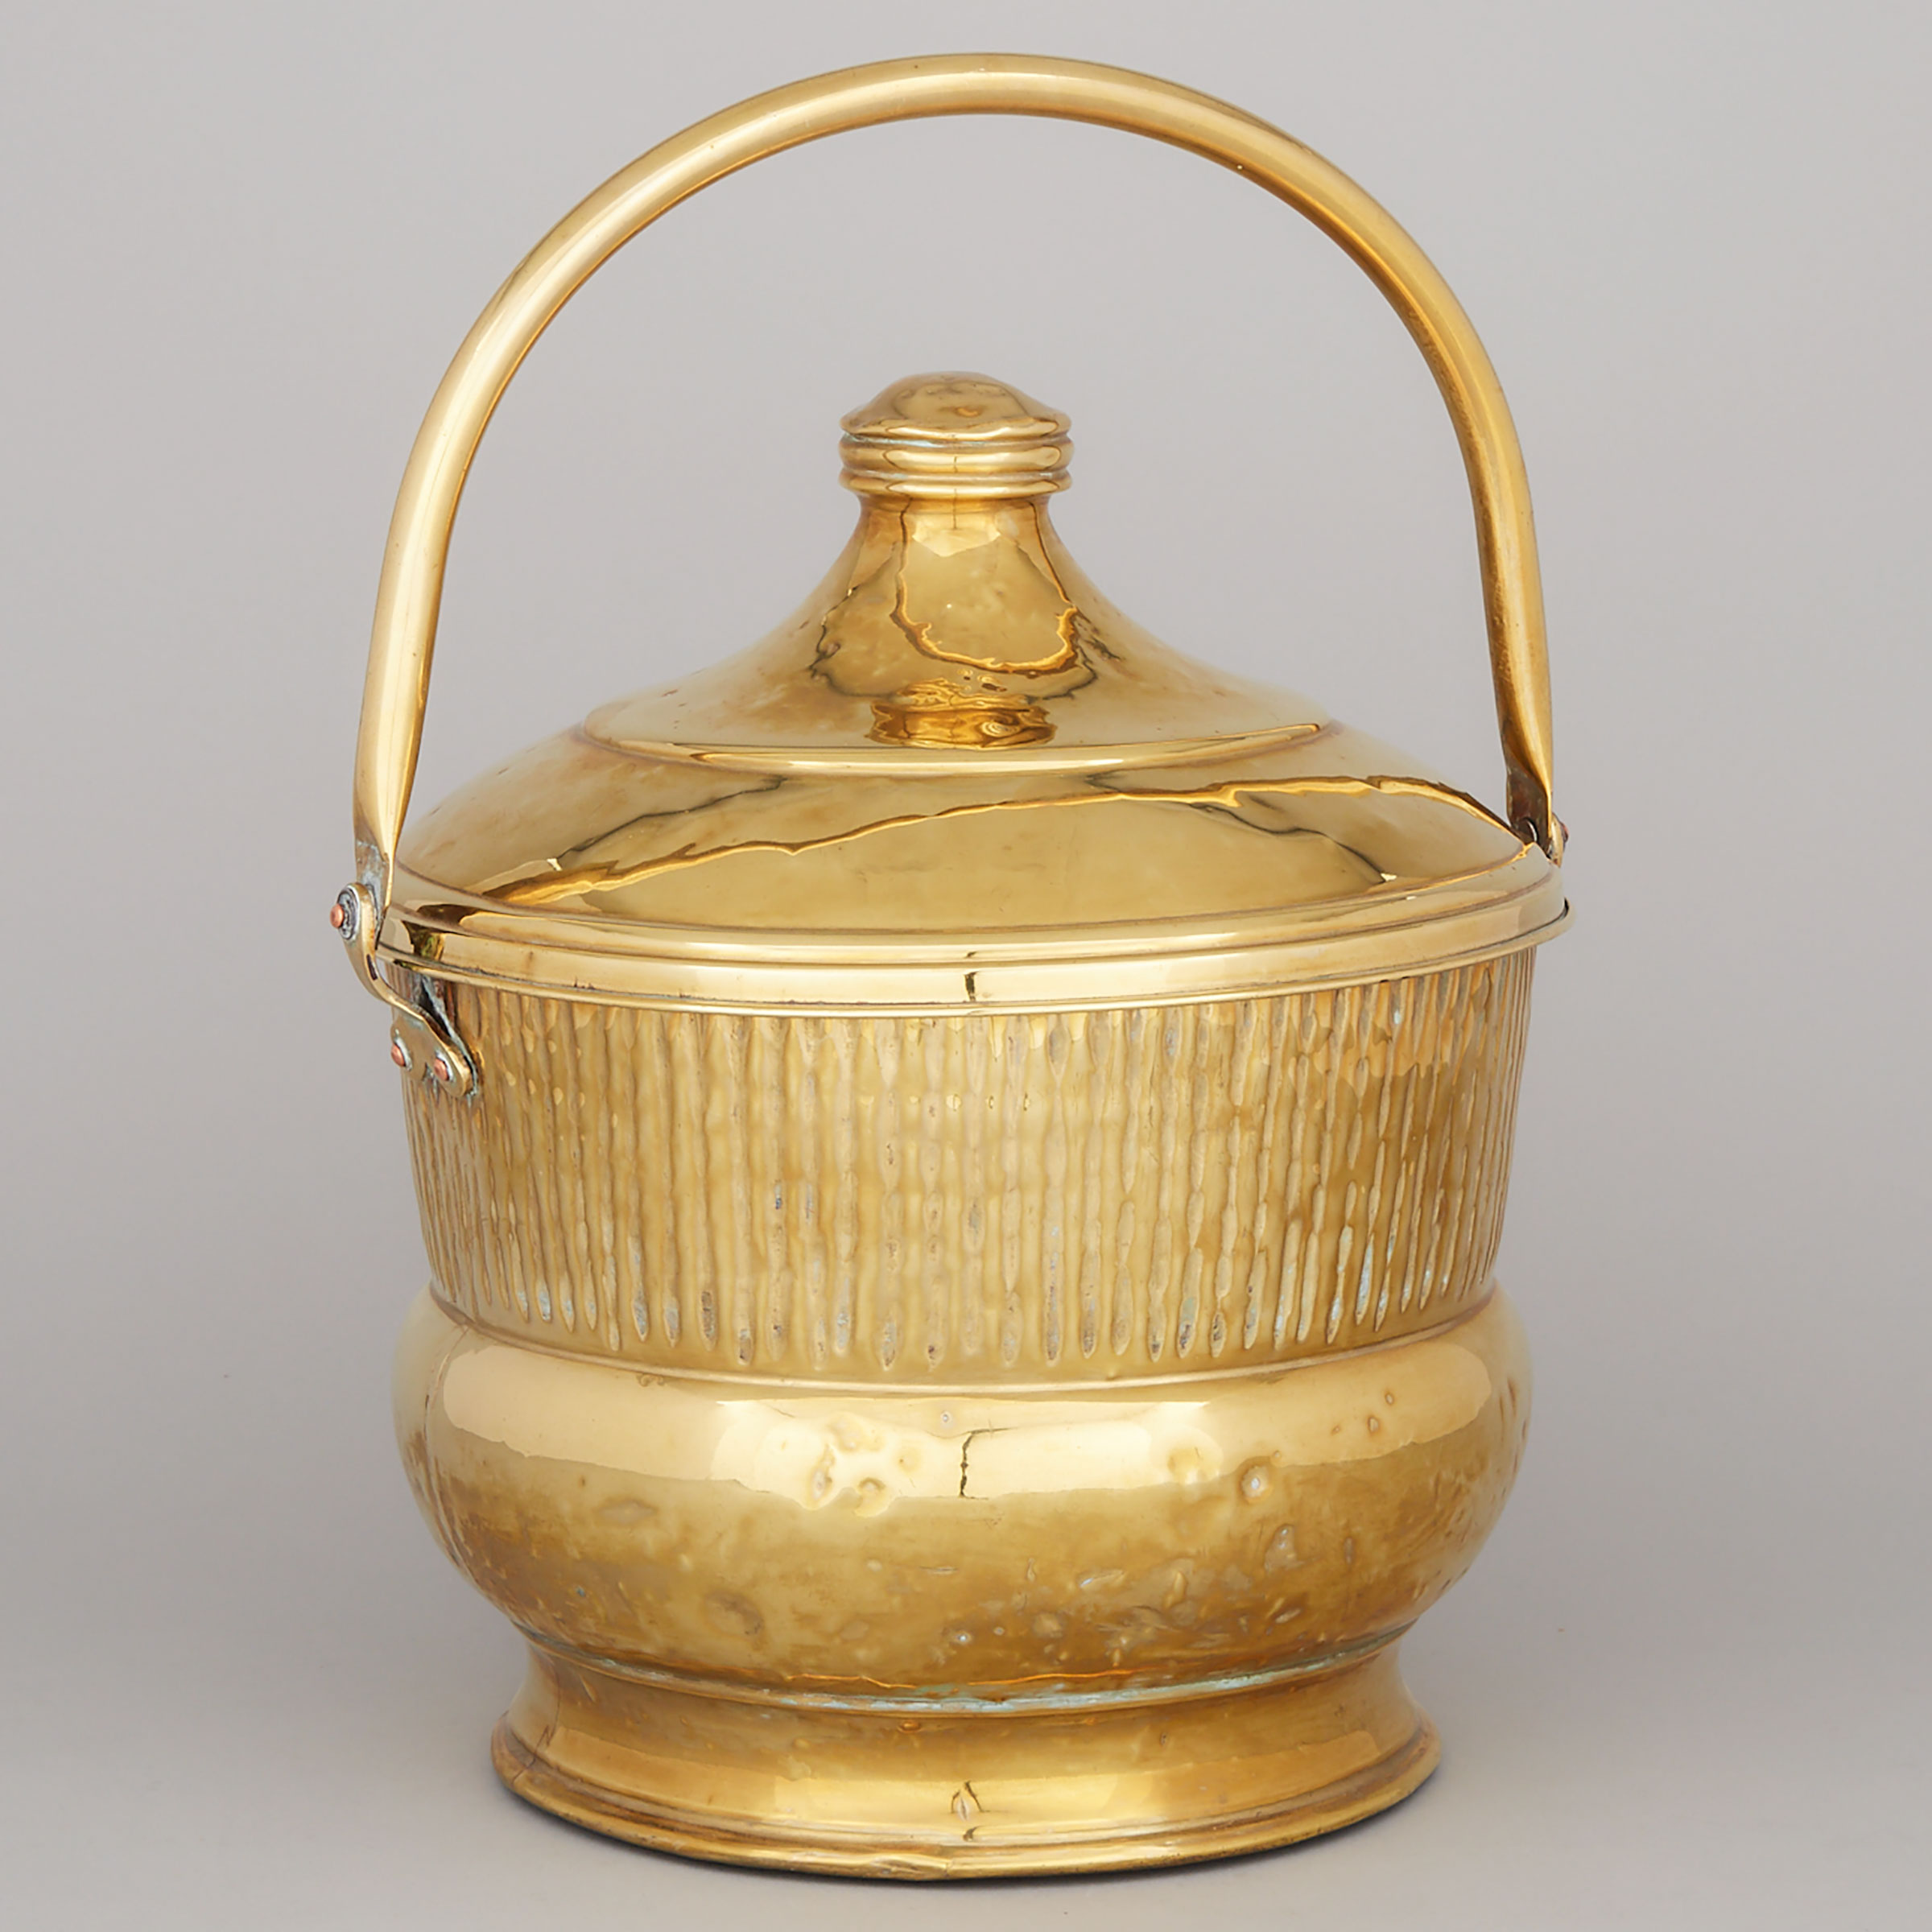 Victorian Brass Covered Pot, 19th century